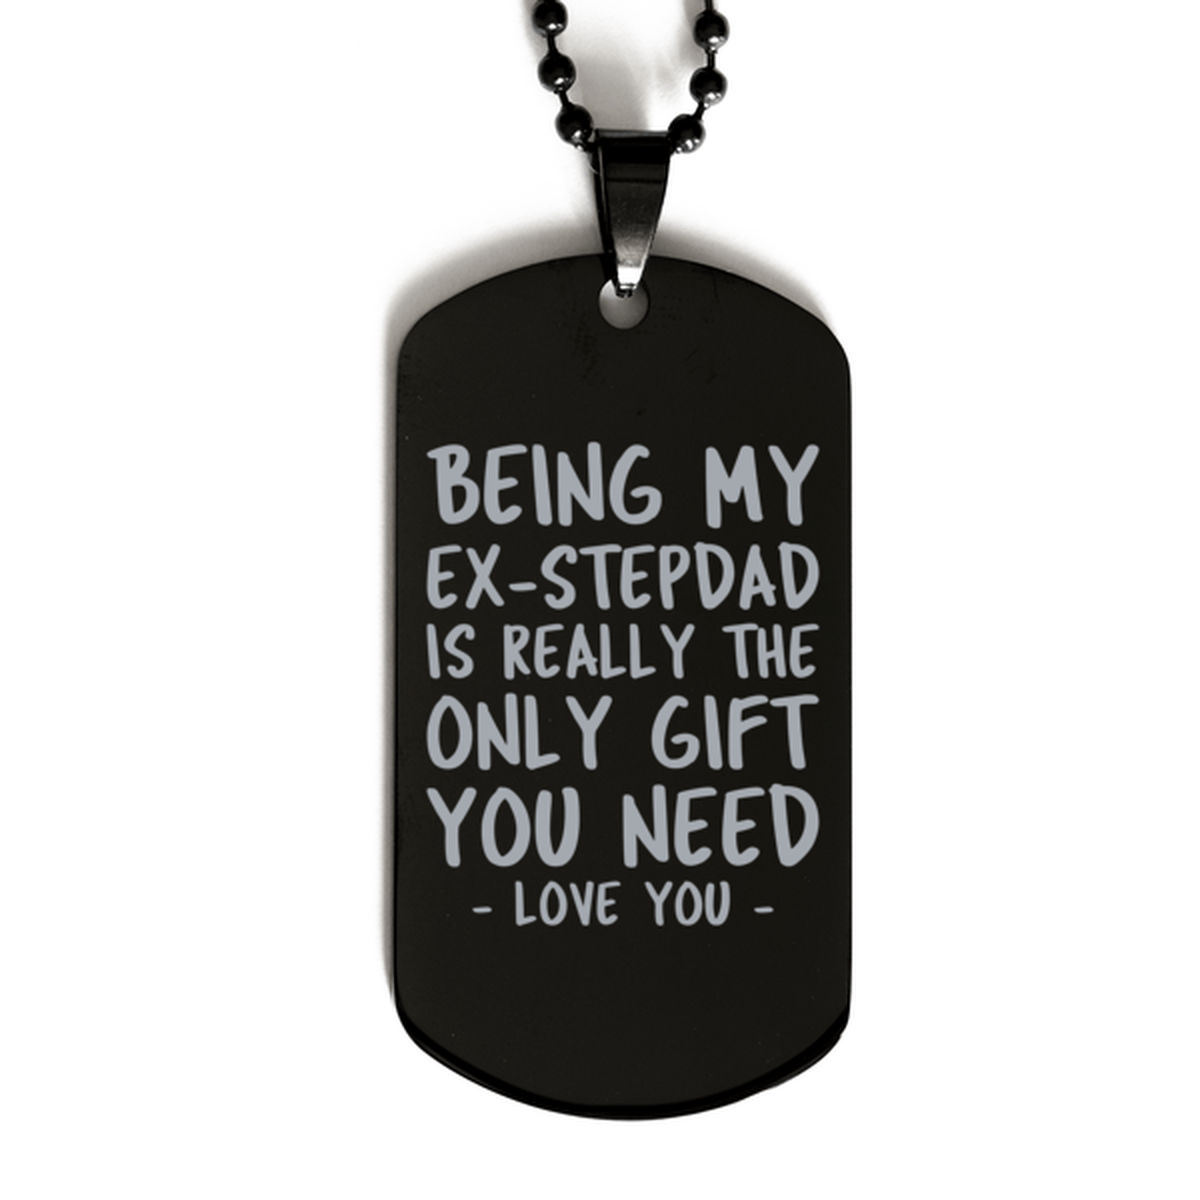 Funny Ex-stepdad Black Dog Tag Necklace, Being My Ex-stepdad Is Really the Only Gift You Need, Best Birthday Gifts for Ex-stepdad